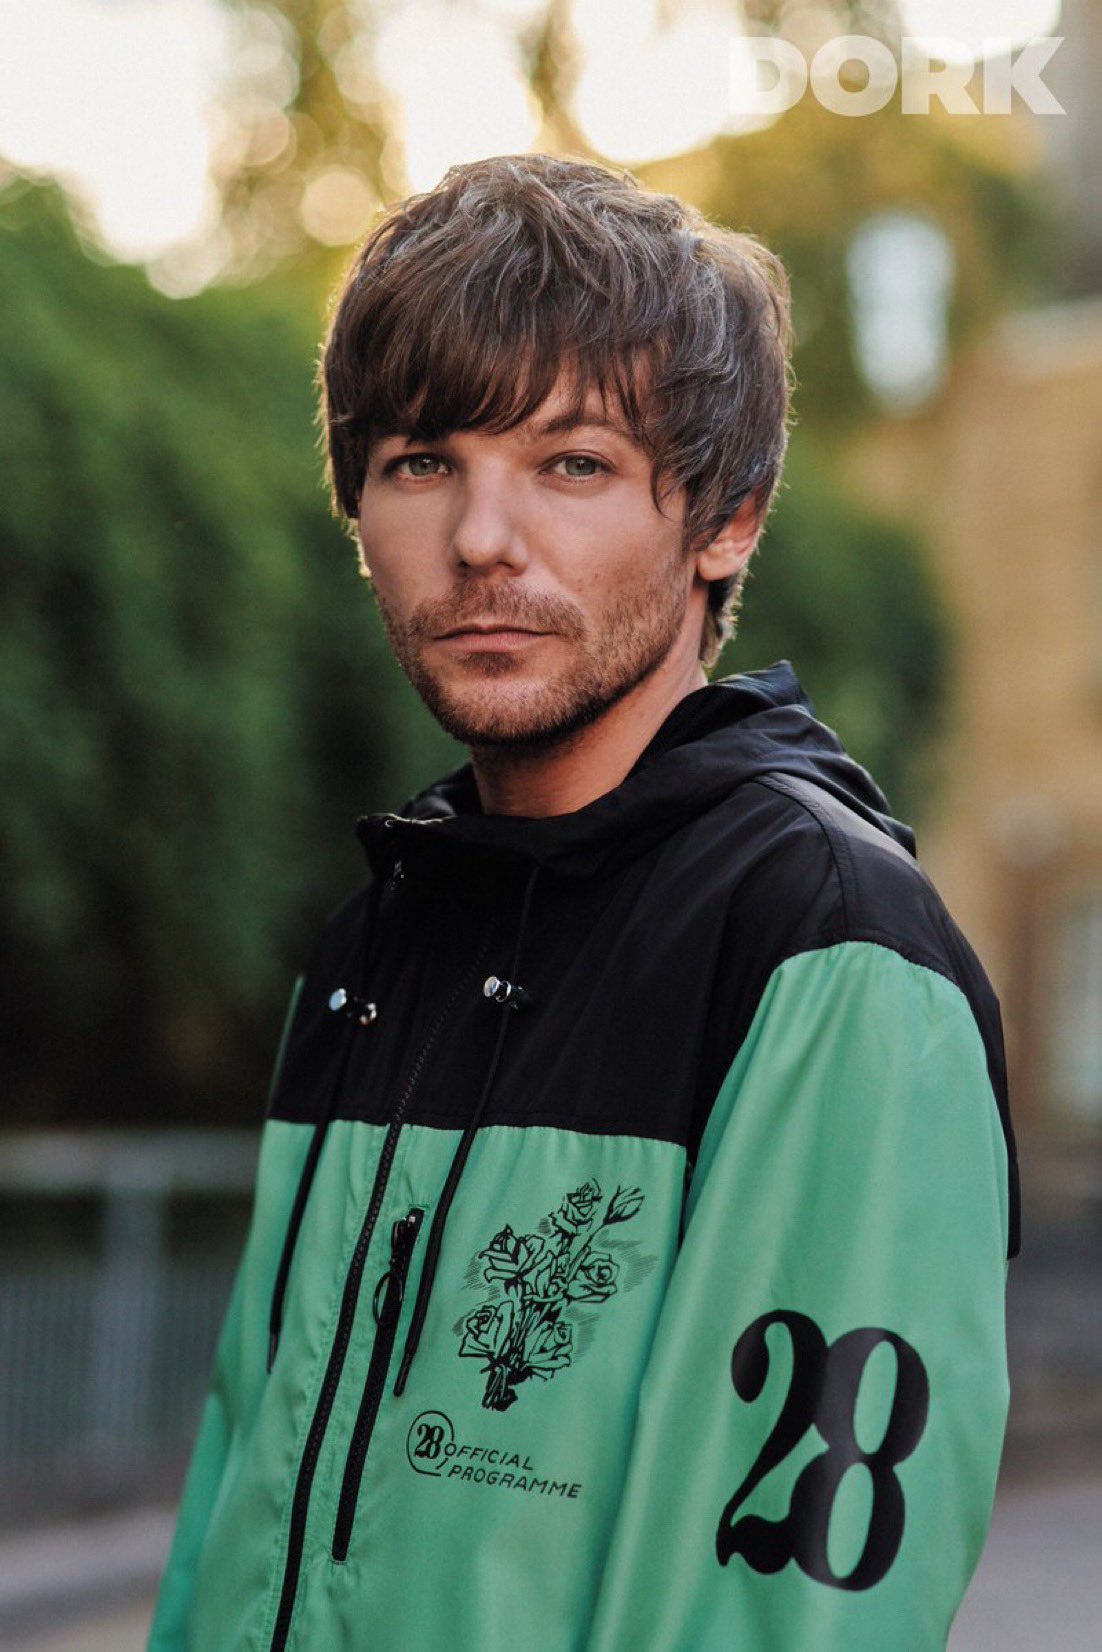 Louis Tomlinson Fashion on X: Louis wore a Self-Designed 28 Official  Programme Colourblock Windbreaker for his October 2022 Dork Magazine Cover  Issue (@readdork). In a Black and Green contrasting design, it has